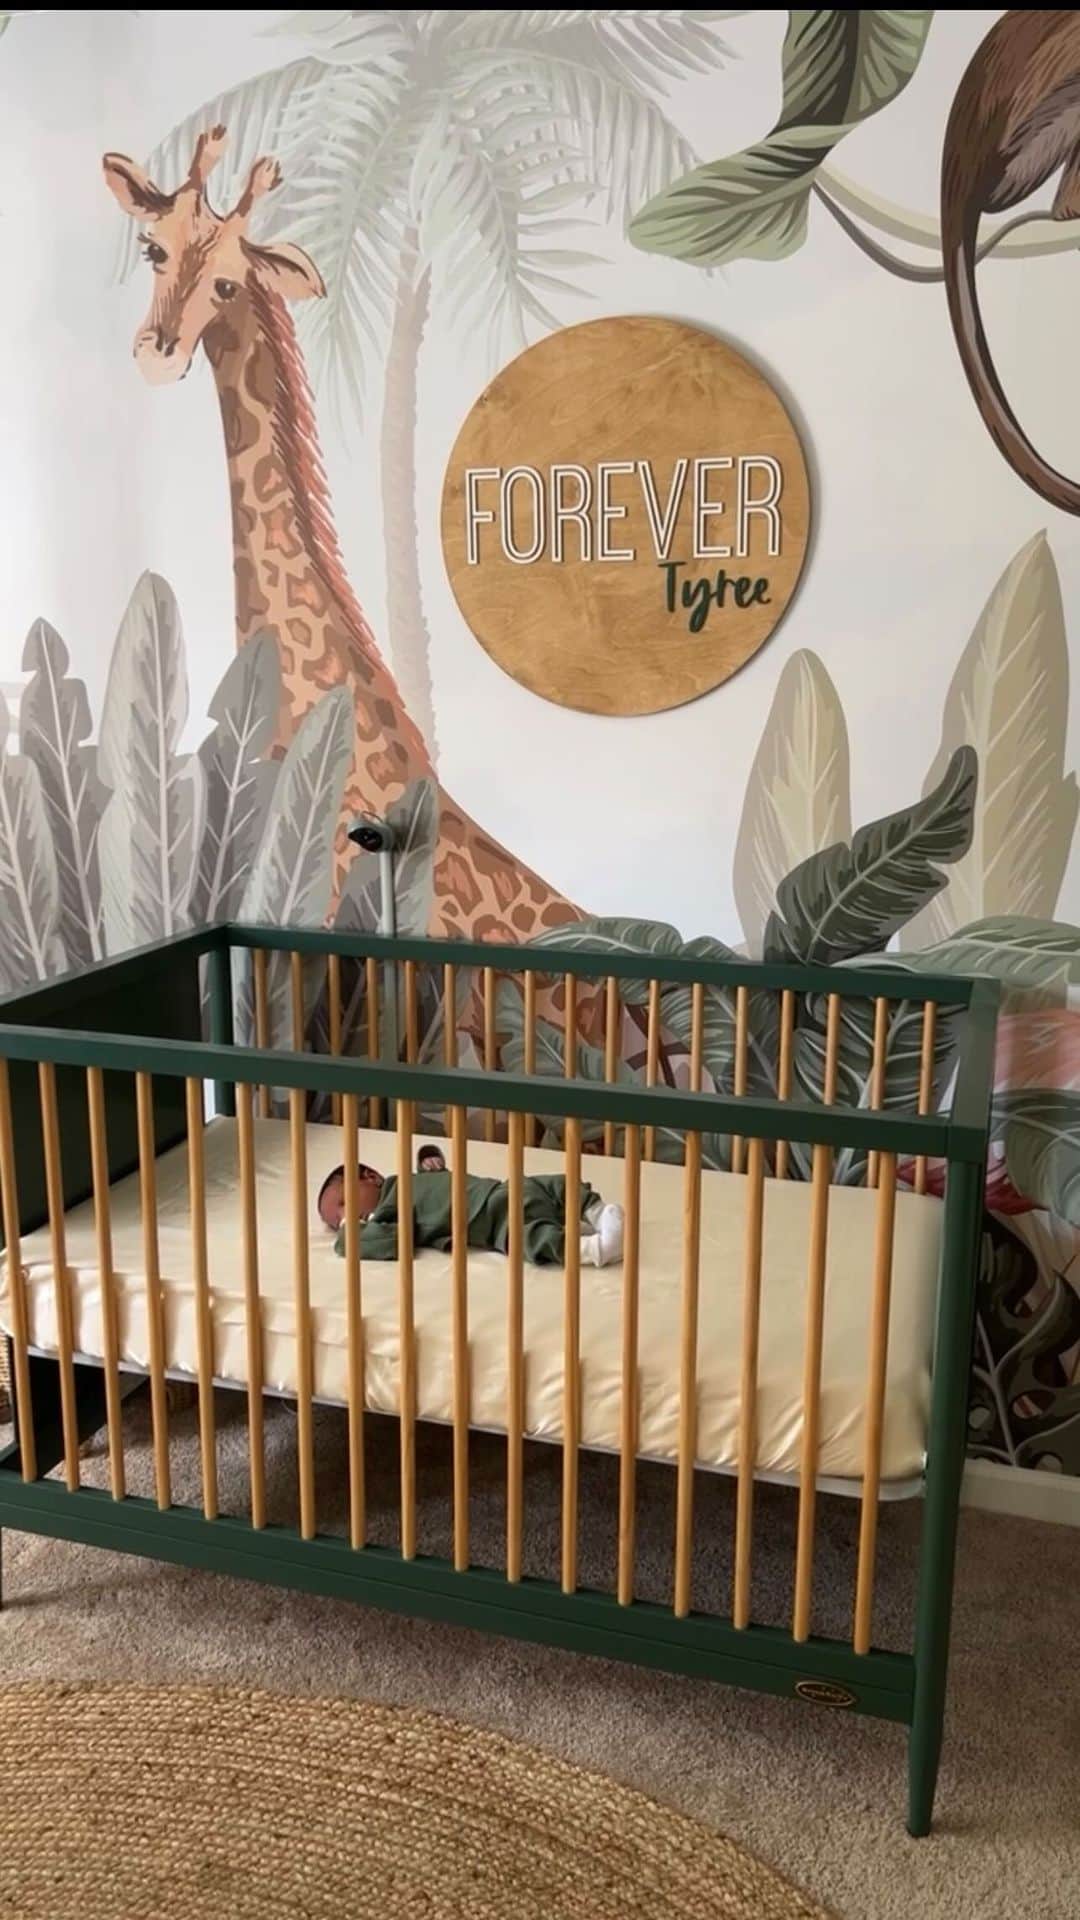 Lira Mercerのインスタグラム：「🌴NURSERY REVEAL🌴 As soon as I found out I was having a son, I saw this nursery in my head yall, & i had to have it. I made a folder & obsessed over every piece. I searched high & low for certain things, but I was COMMITTED to the project ! Everything was handpicked & whatever felt right when I thought of my son,  is what I bought. This is such a MOMENT! Nesting & Doing your nursery exactly how you want is so important for moms. I was so happy this whole time! So much love & energy went into this room & I wanna thank my family & my man for staying out of my way & letting me do my thang! 😂😂 Some of these pieces were on my registry so a VERY warm & special S/O to my tribe for coming thru & helping me bring this to life! Everyone was so amazing during this process. I have literally the best friends & family.  Forever Tyree Morris, Know that you are LOVED & I hope you love your nursery as much as mommy & daddy does!  🌴🦒🐘🦓🐆🐒🐯🌴」